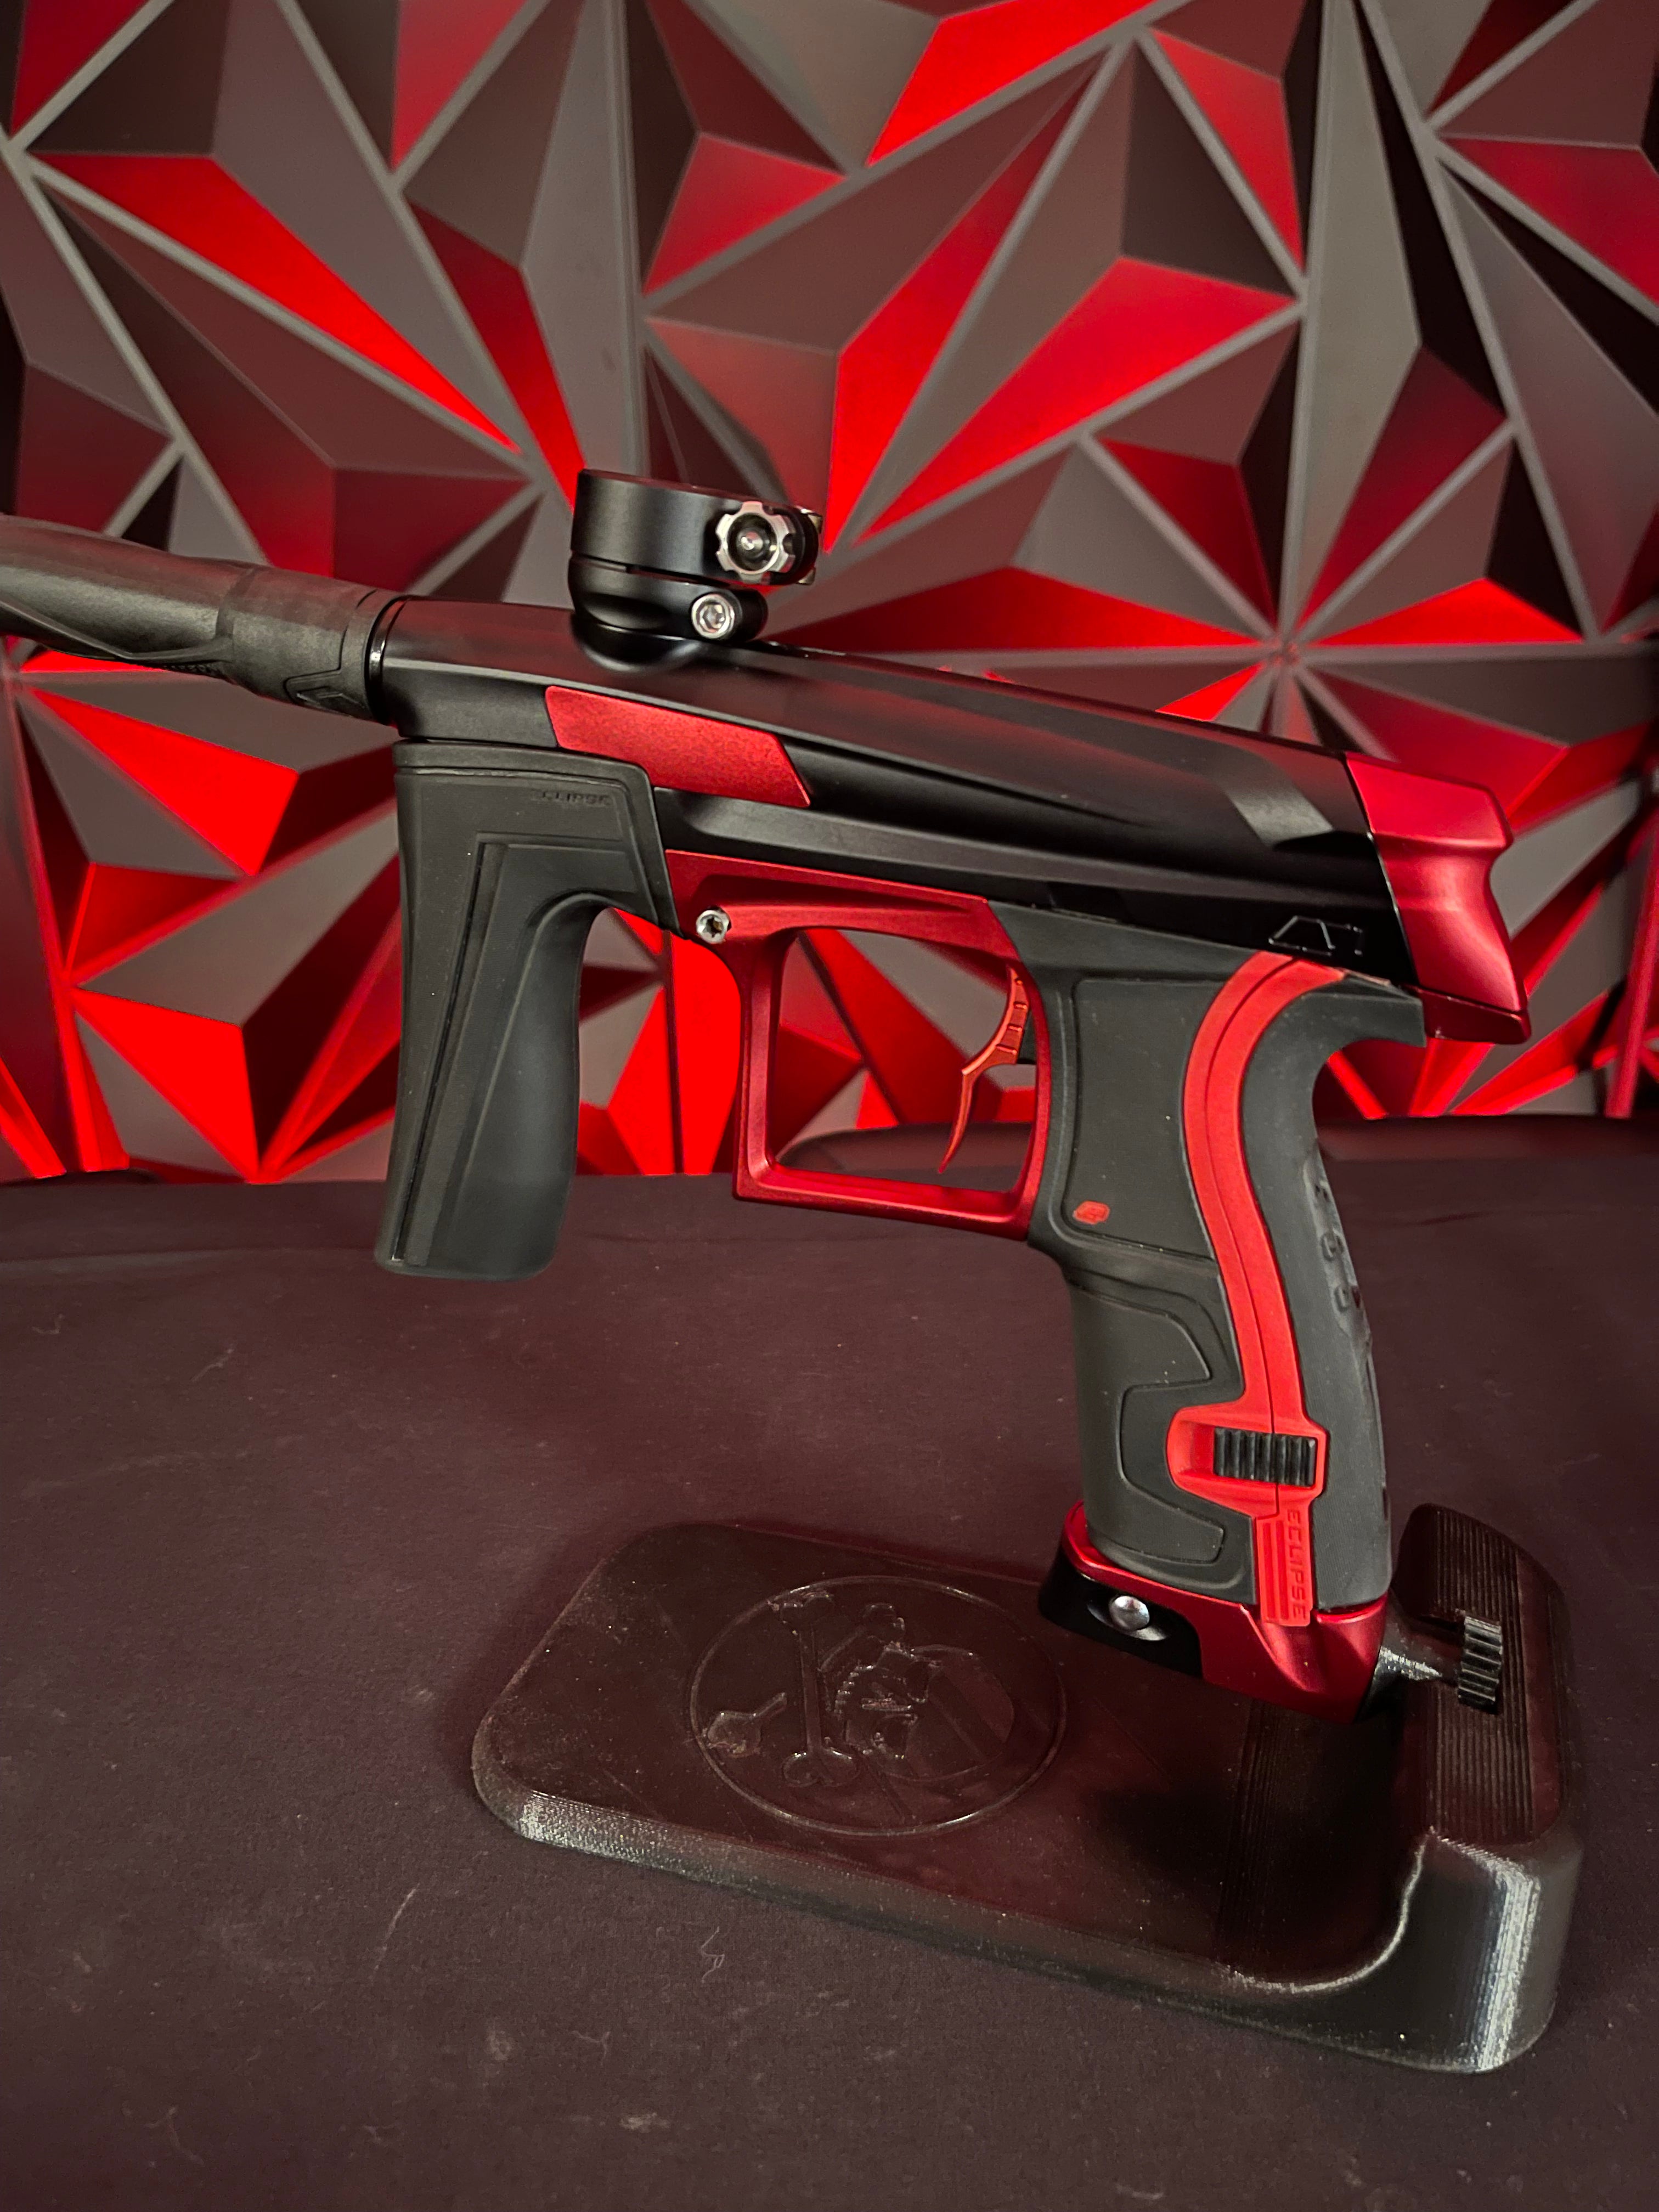 Used Planet Eclipse Cs1 Paintball Gun - Black/Red w/ Carbon IC Barrel and CS2 Back Grip